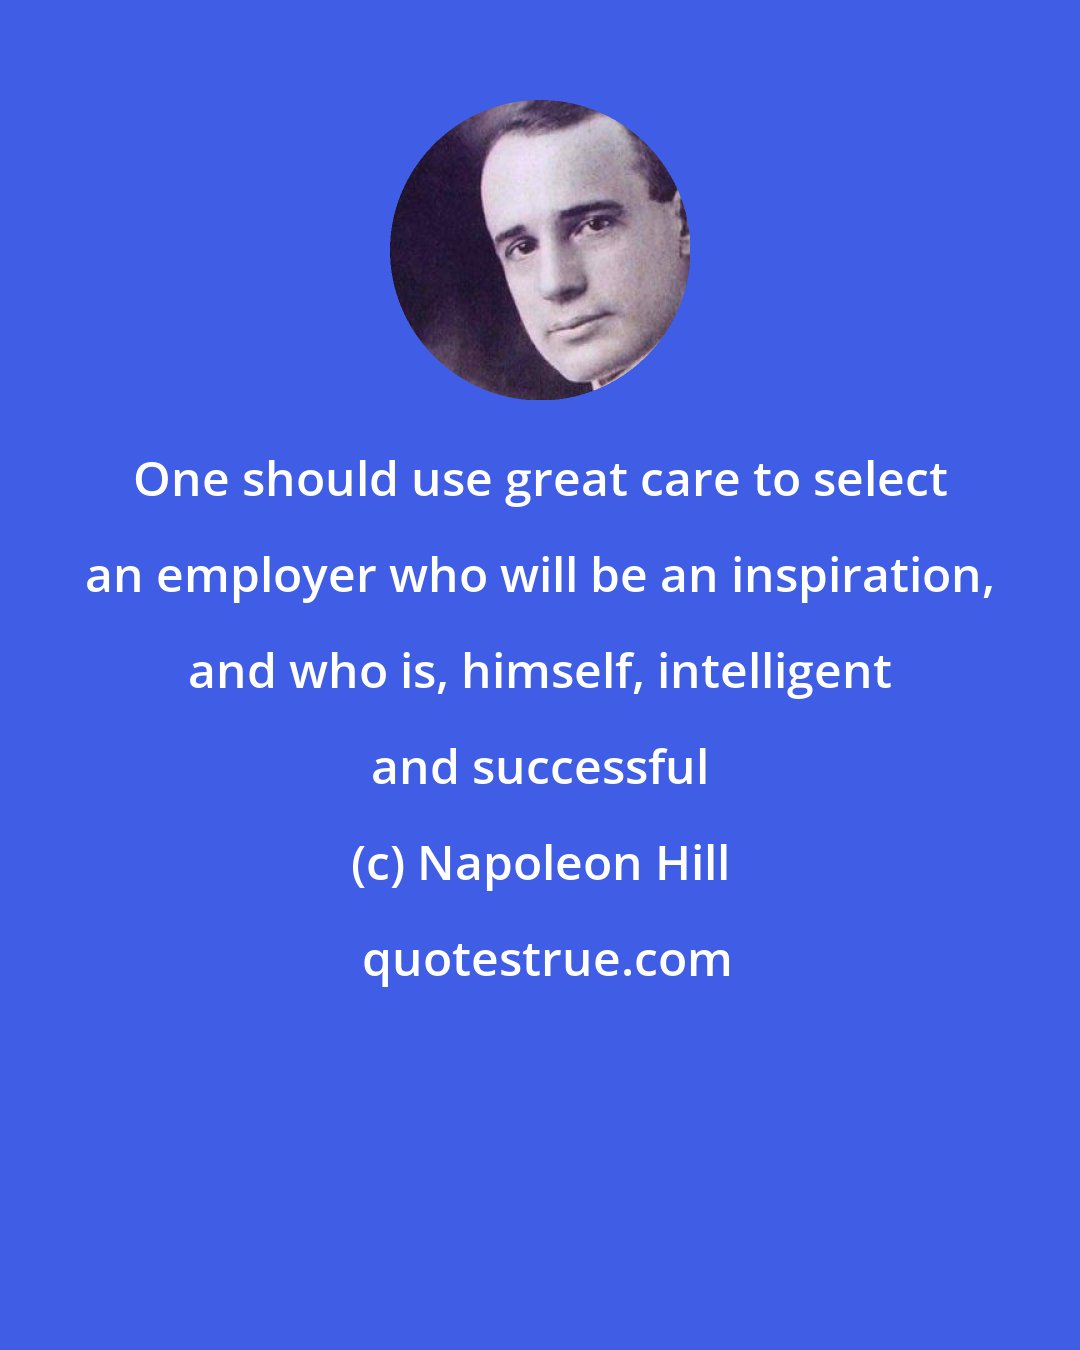 Napoleon Hill: One should use great care to select an employer who will be an inspiration, and who is, himself, intelligent and successful